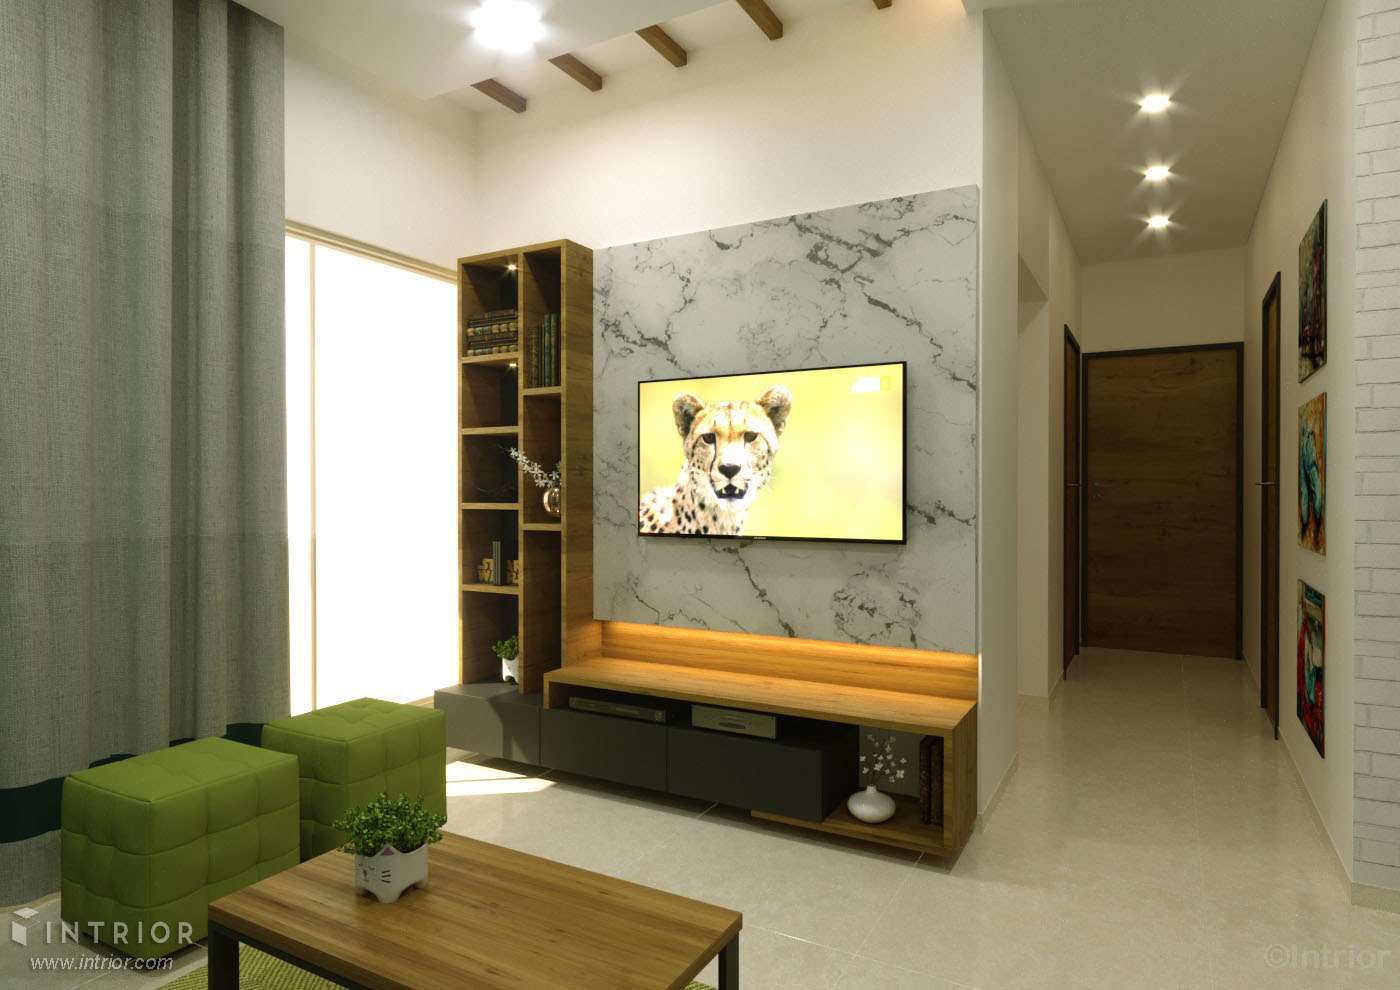 Living Room with Tv unit